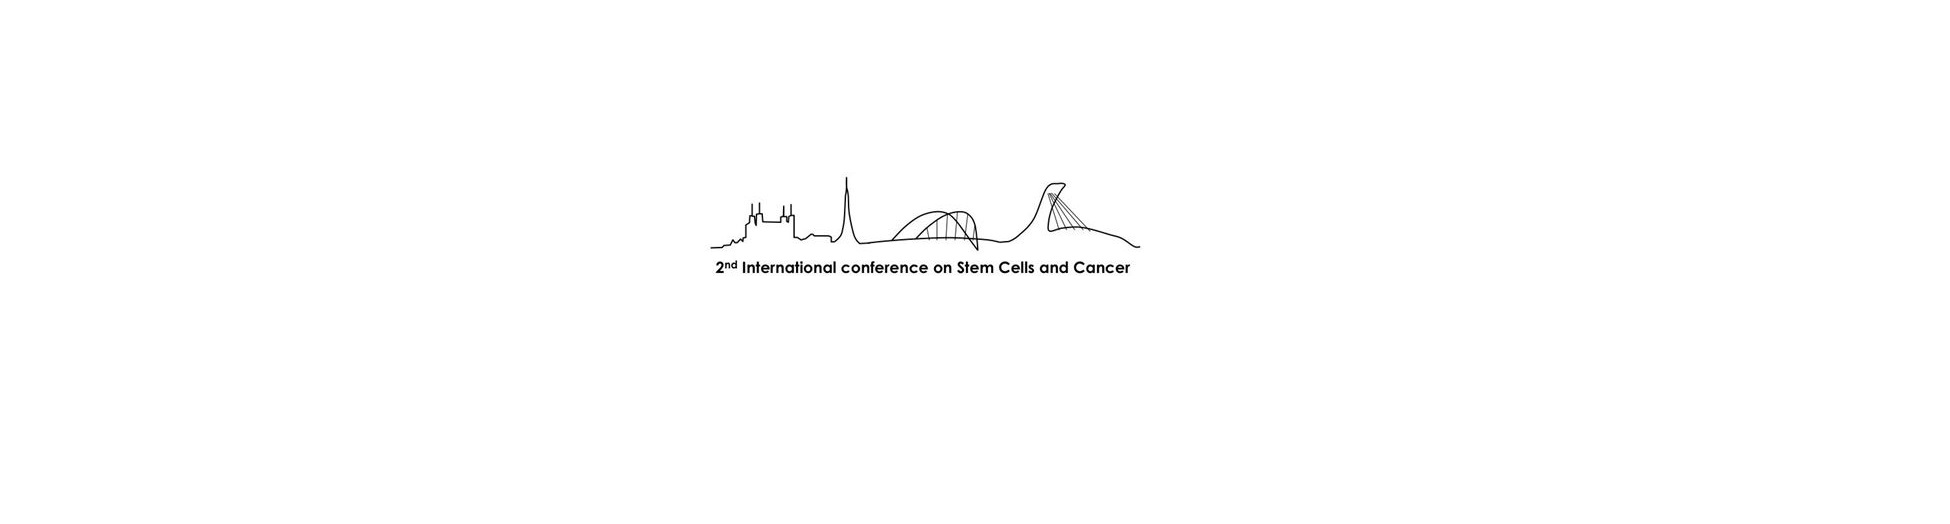 International Conference on Stem Cells and Cancer